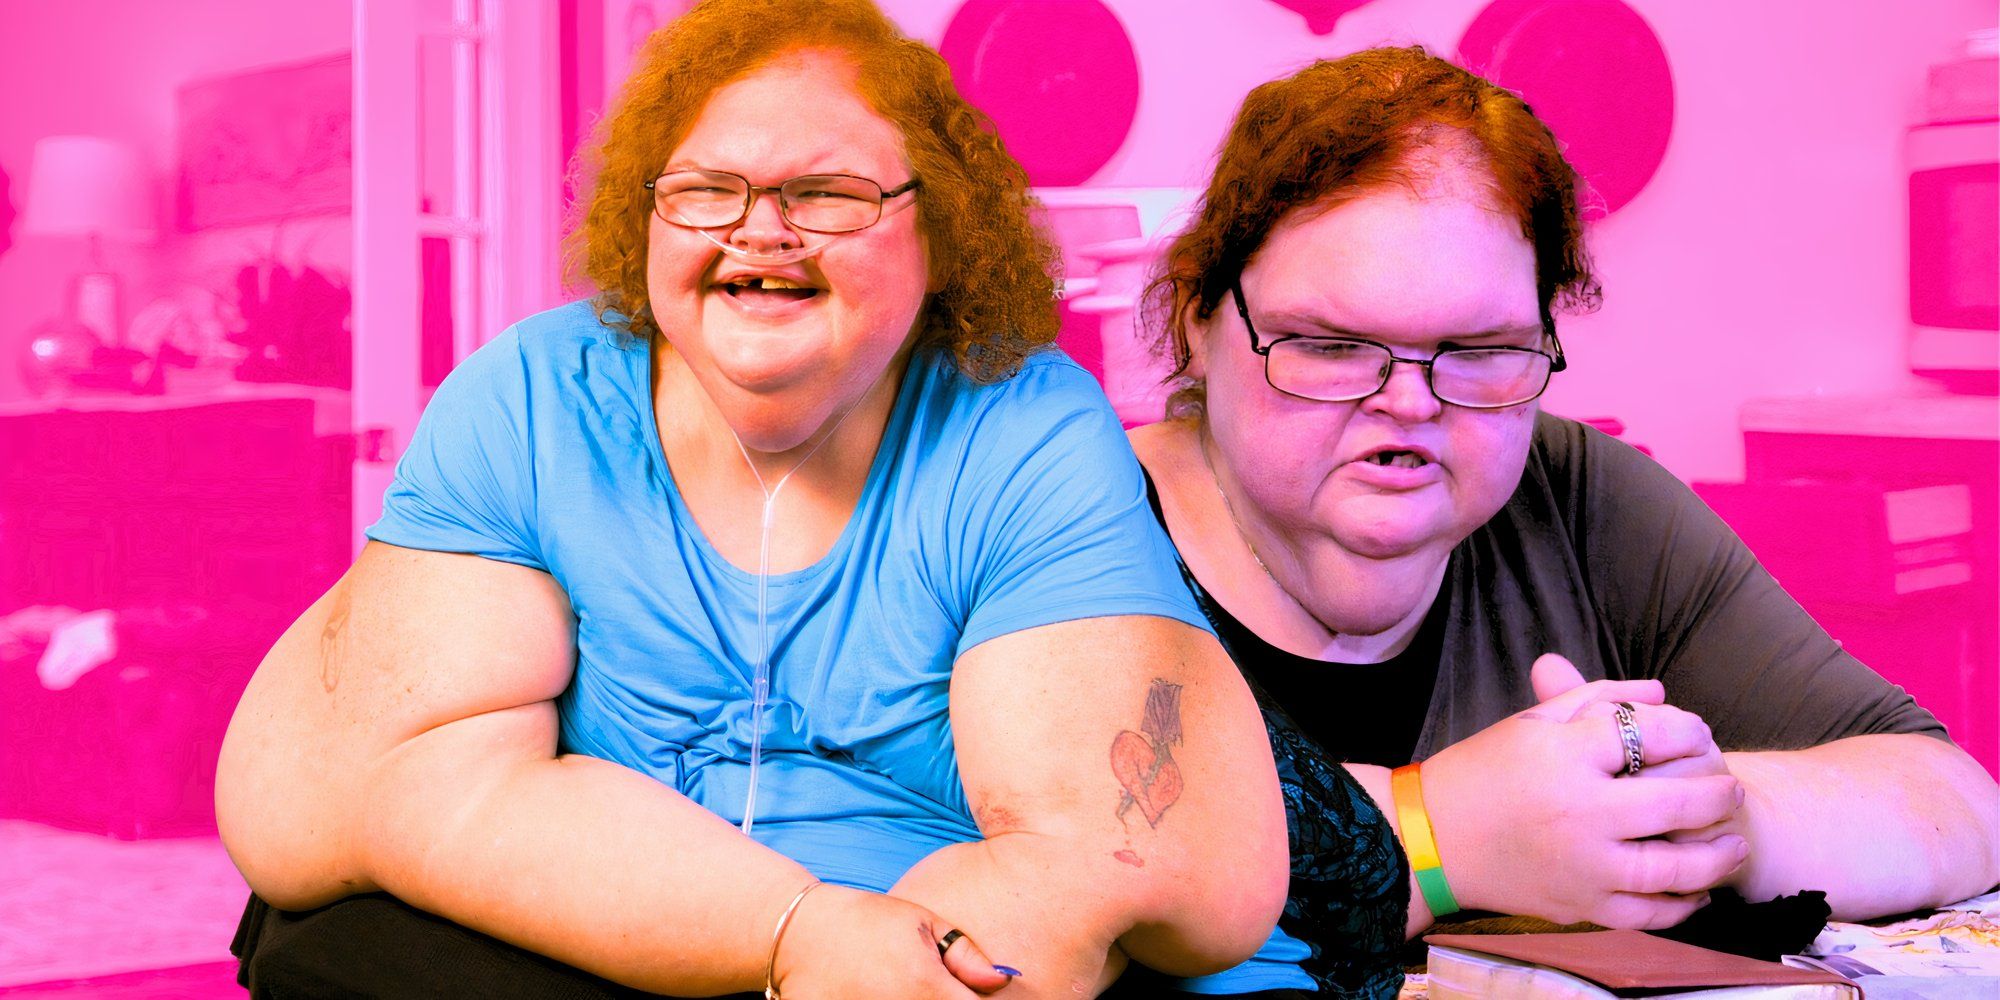 montage of Tammy from 1000-lb sisters with different moods sad and happy with pink background